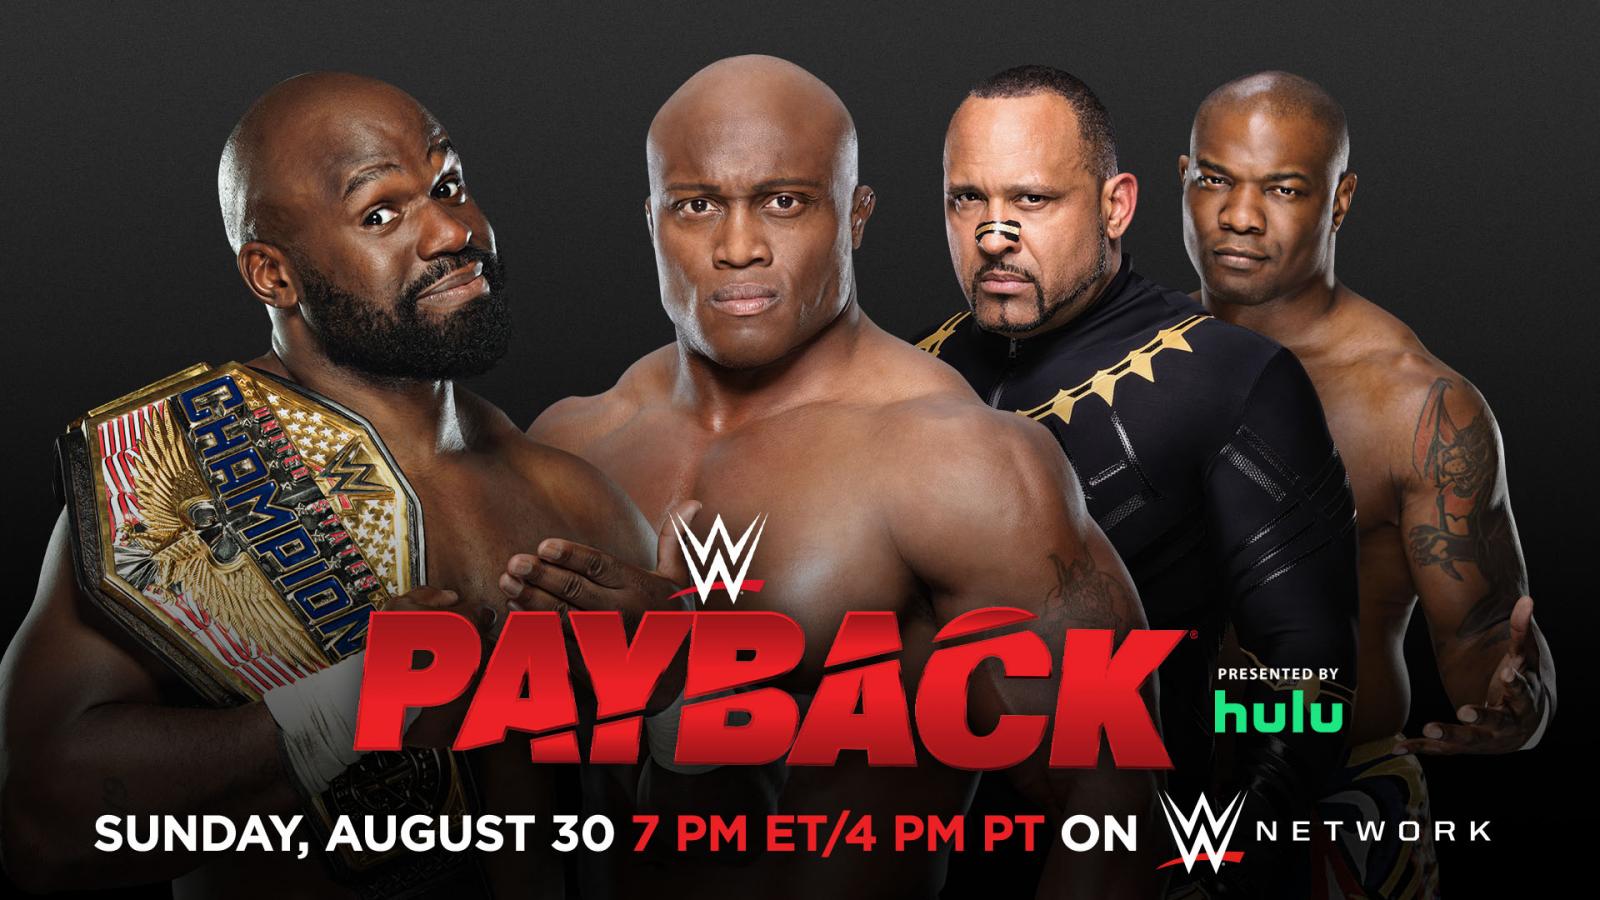 WWE Payback 2020 Matches & Predictions